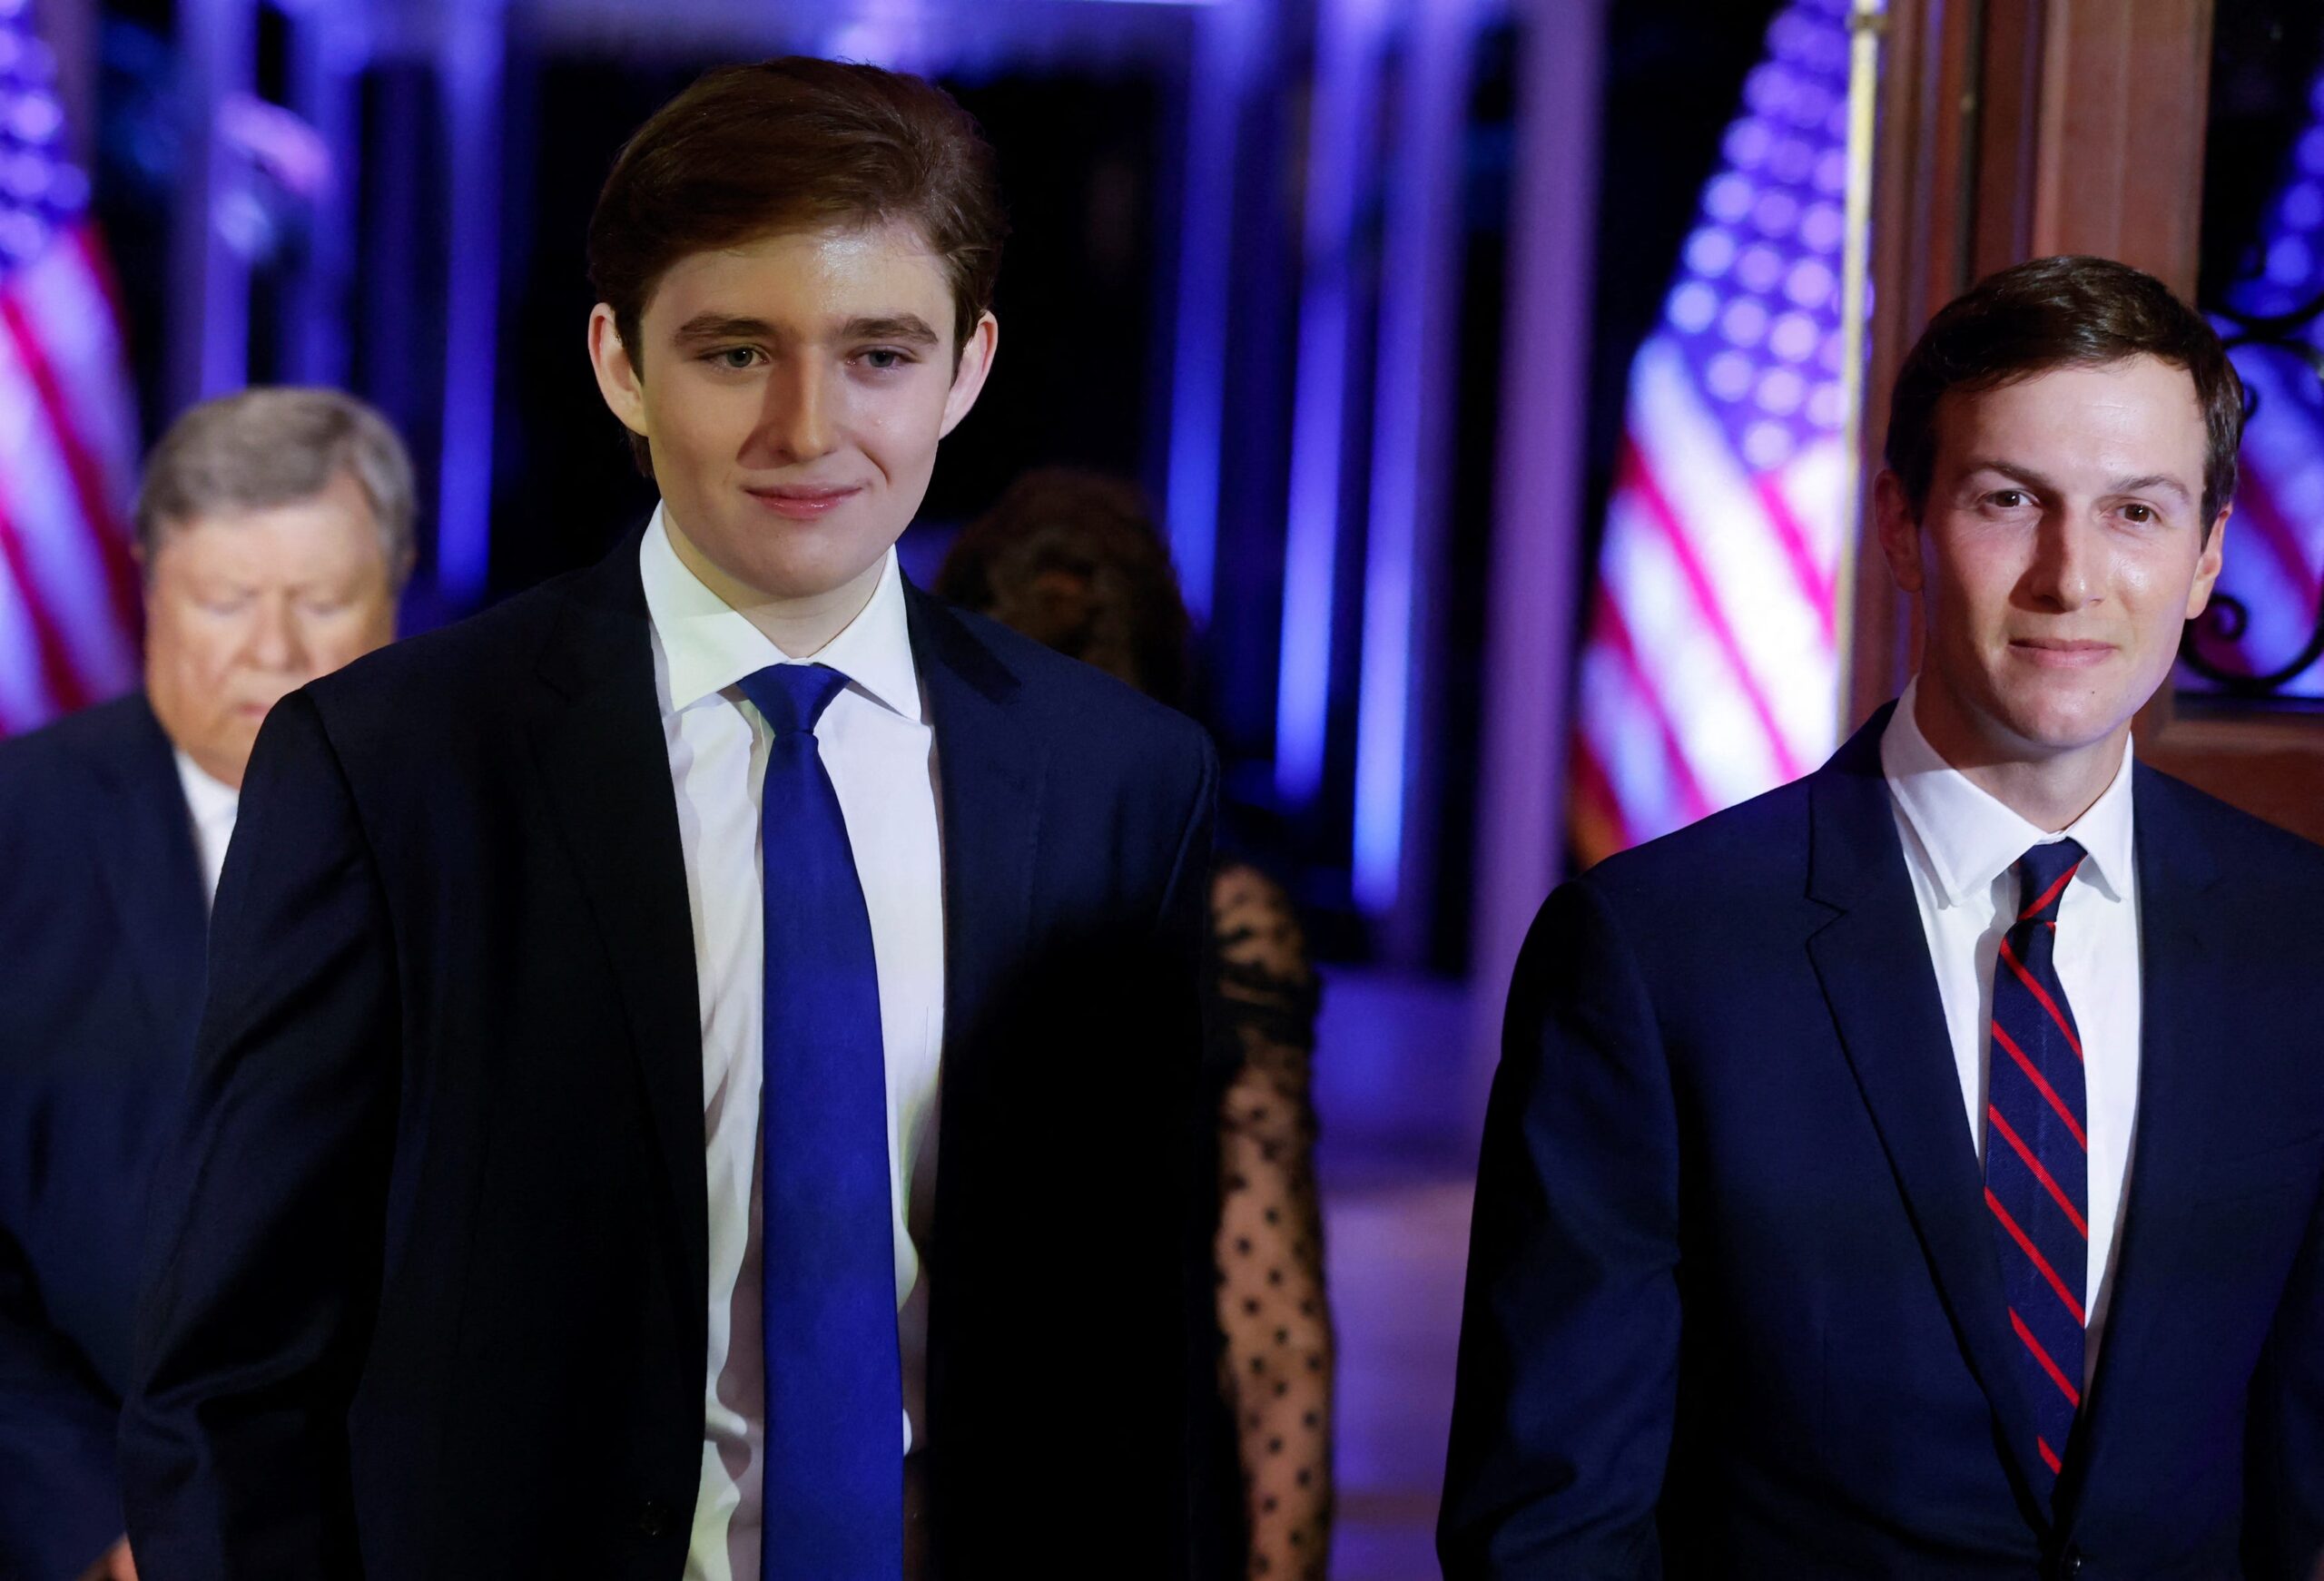 Barron Trump with Jared Kushner at Donald Trump's election announcement